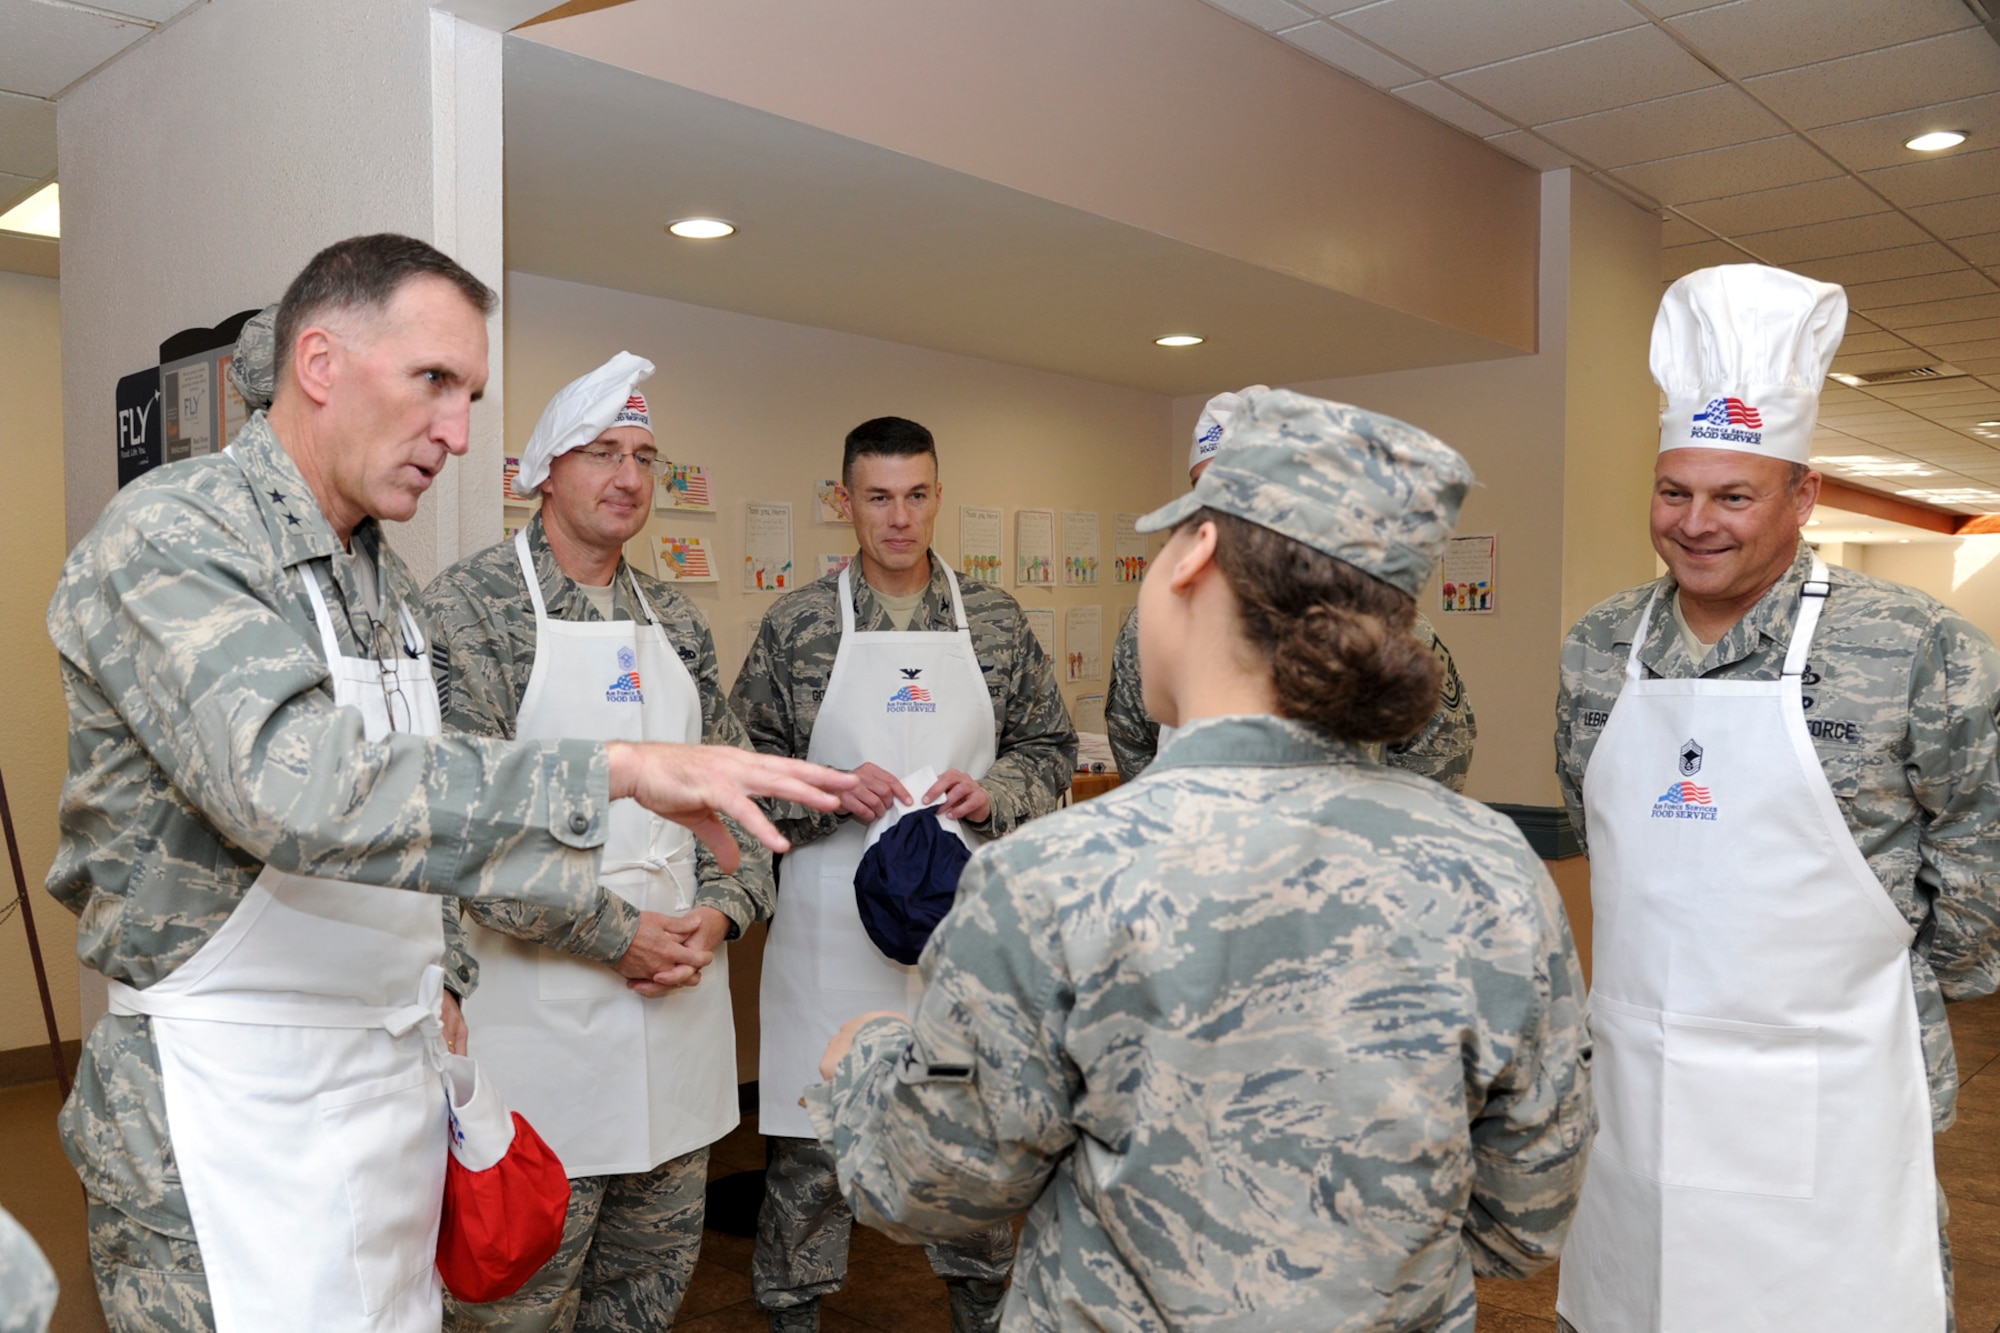 Airman Janaye Galbraith, 2nd Force Support Squadron, briefs senior leadership on food handling guidelines during the Red River Dining Facility Thanksgiving lunch on Barksdale Air Force Base, La., Nov. 27, 2014. The leadership served Thanksgiving meals as an annual Air Force wide event to ensure Airmen get a home cooked meal during the holidays. (U.S. Air Force photo/ Senior Airman Jannelle Dickey)